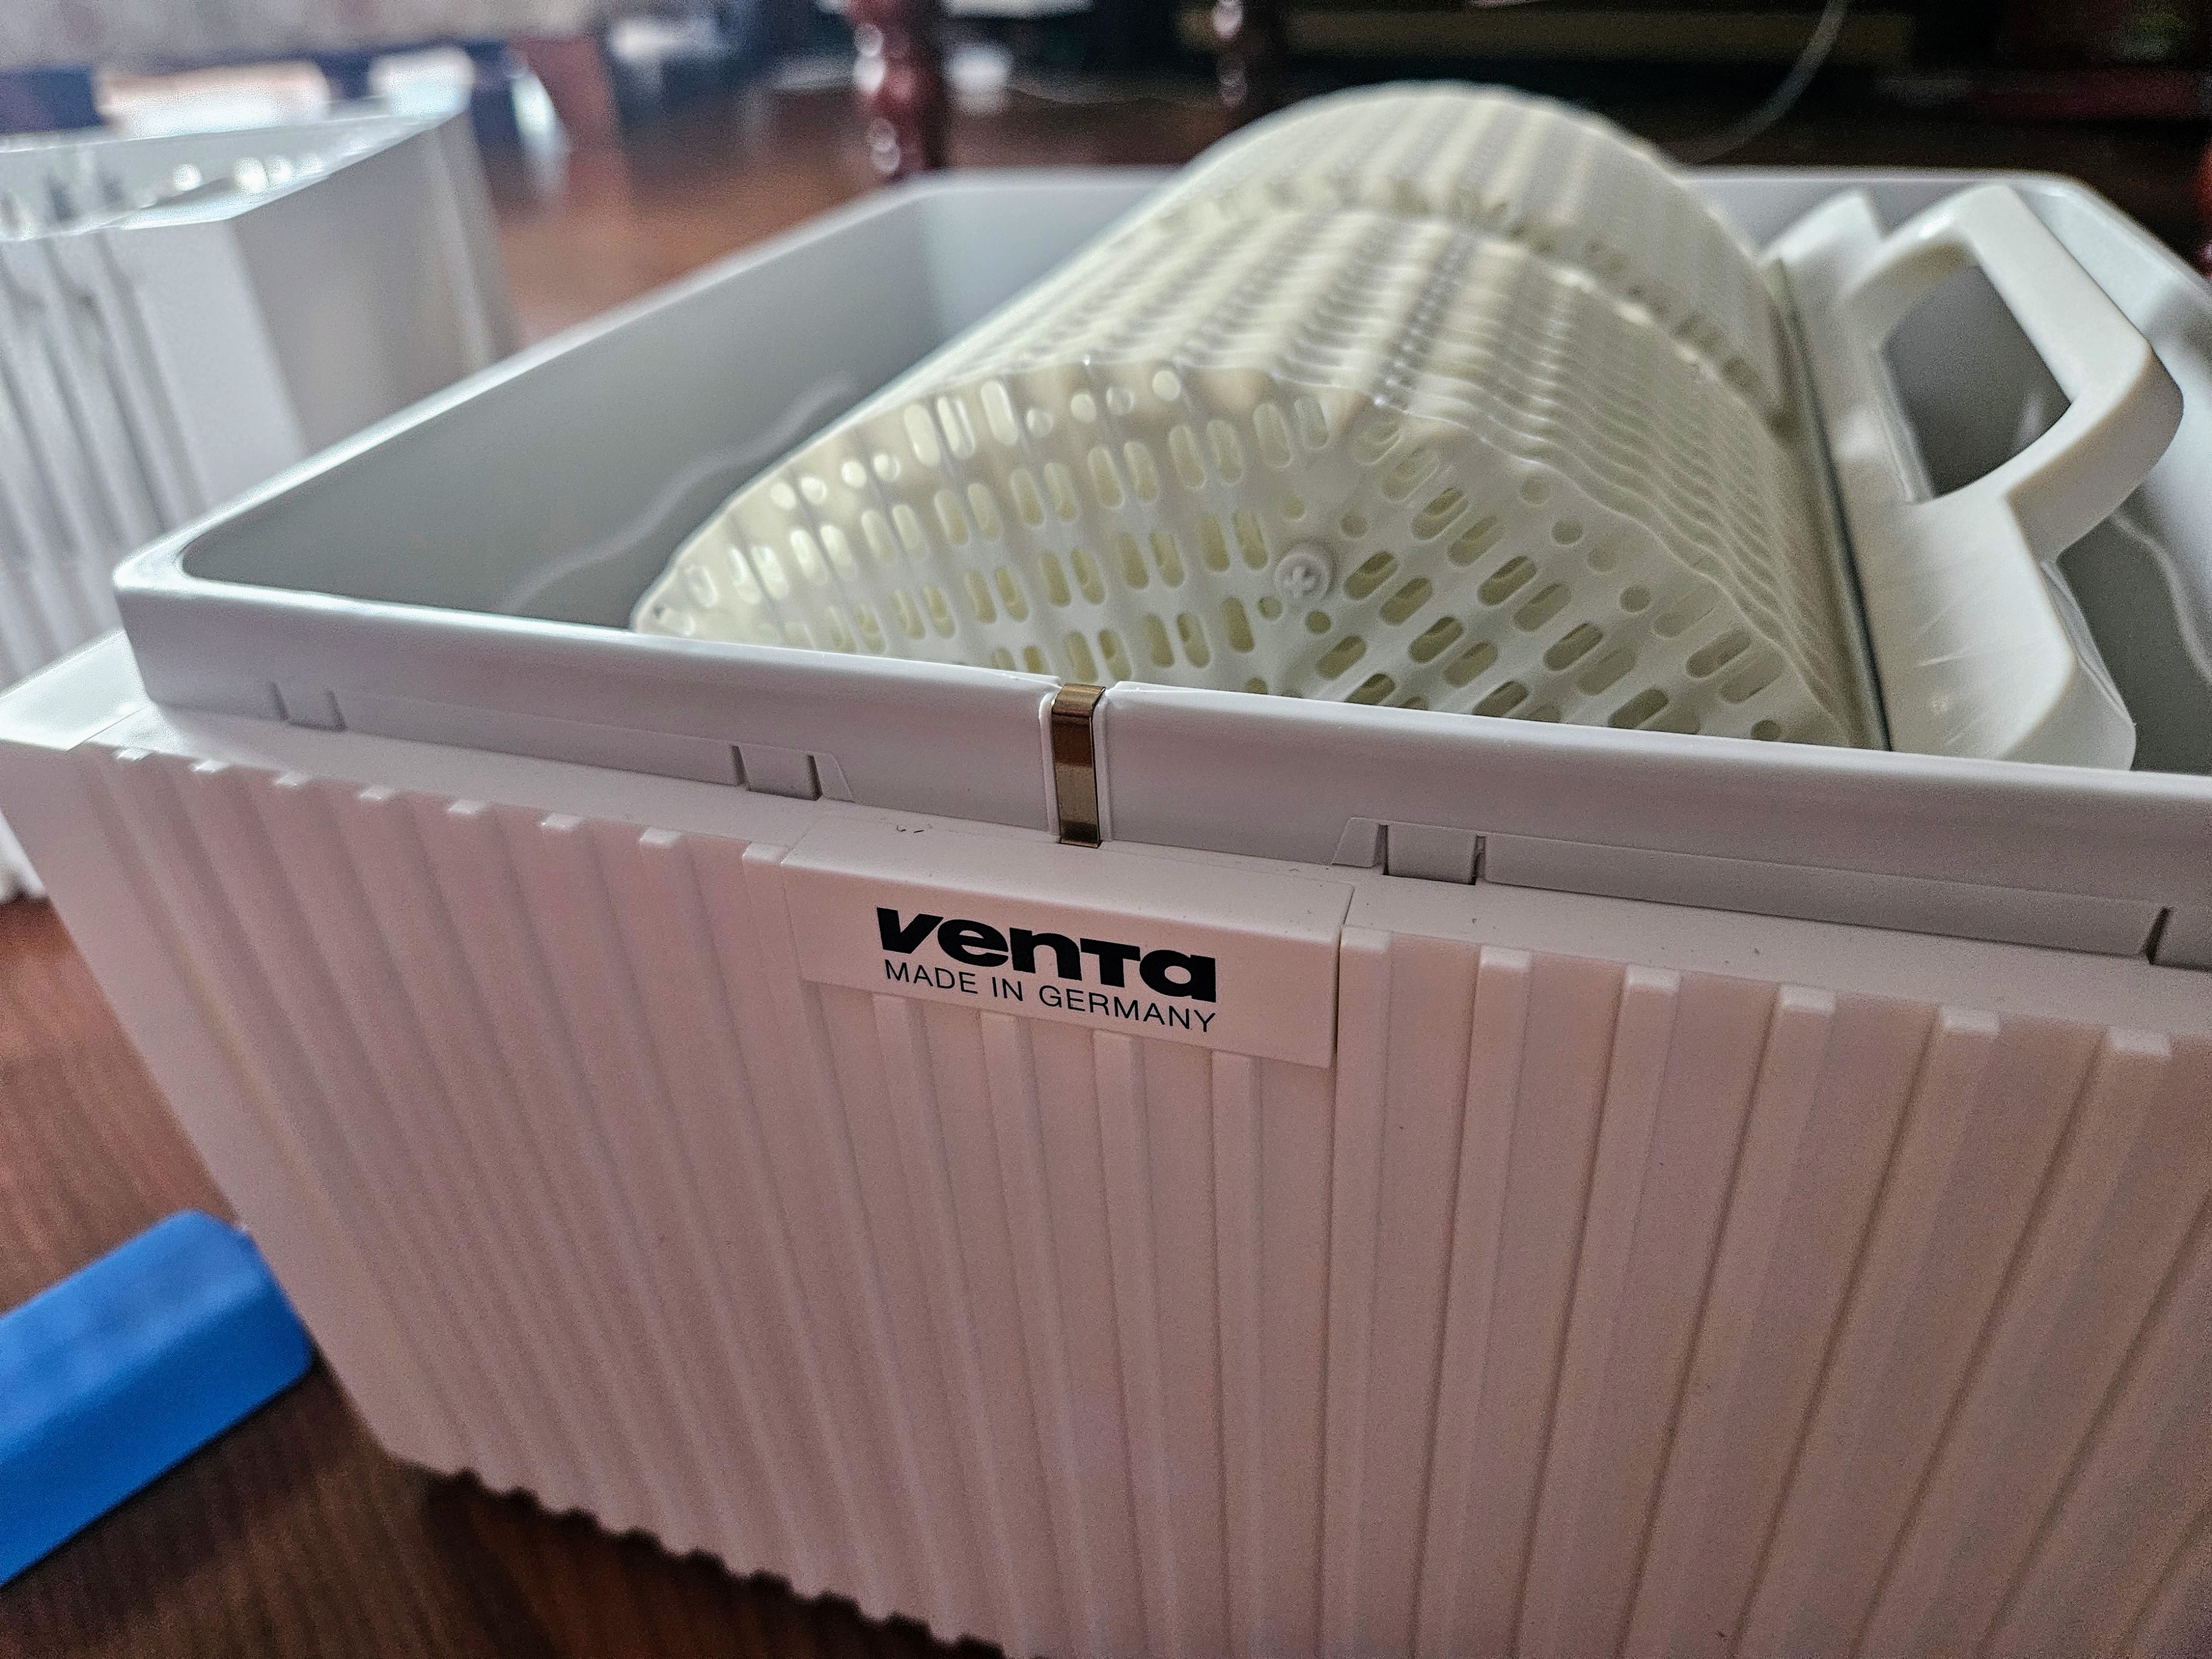 upclose look at the filter inside the venta humidifier.